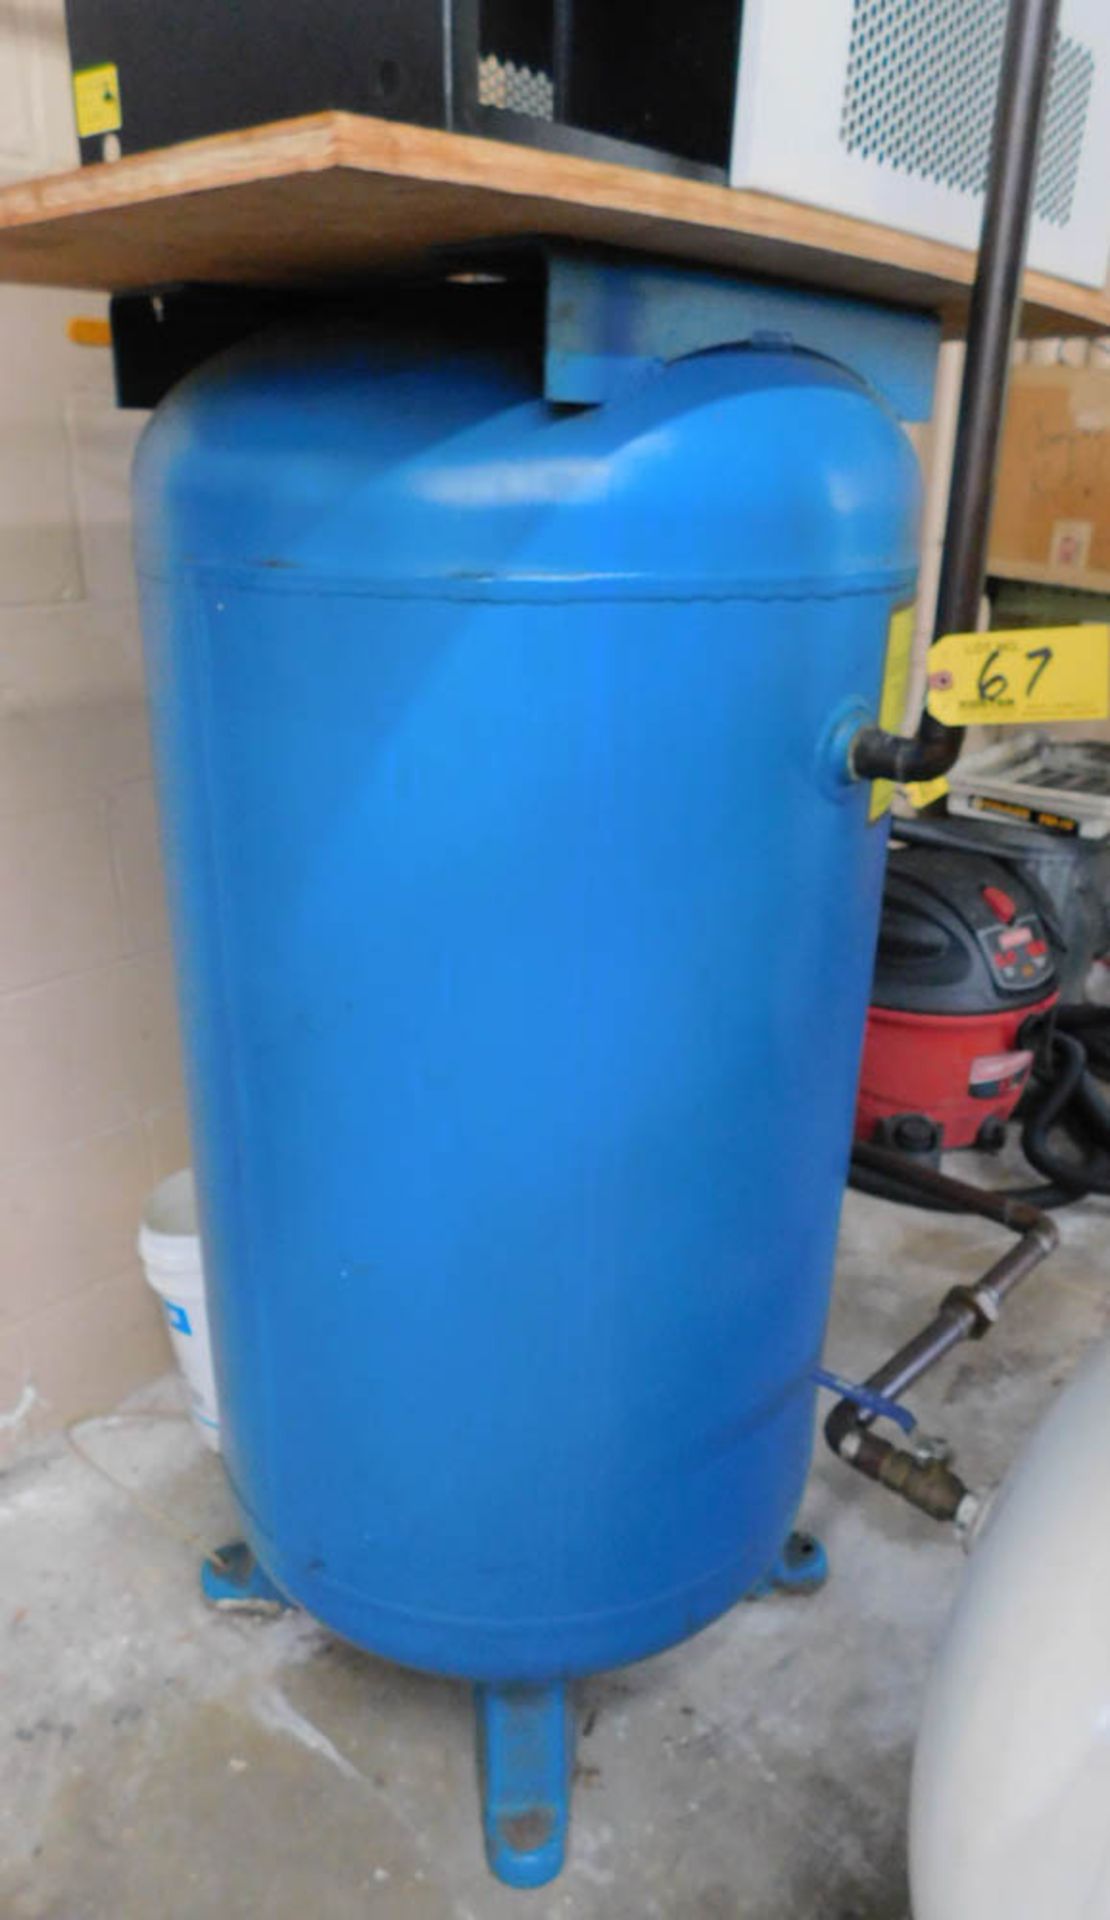 AIR STORAGE TANK (PLEASE ALLOW A FEW DAYS FOR REMOVAL OF DRYER)